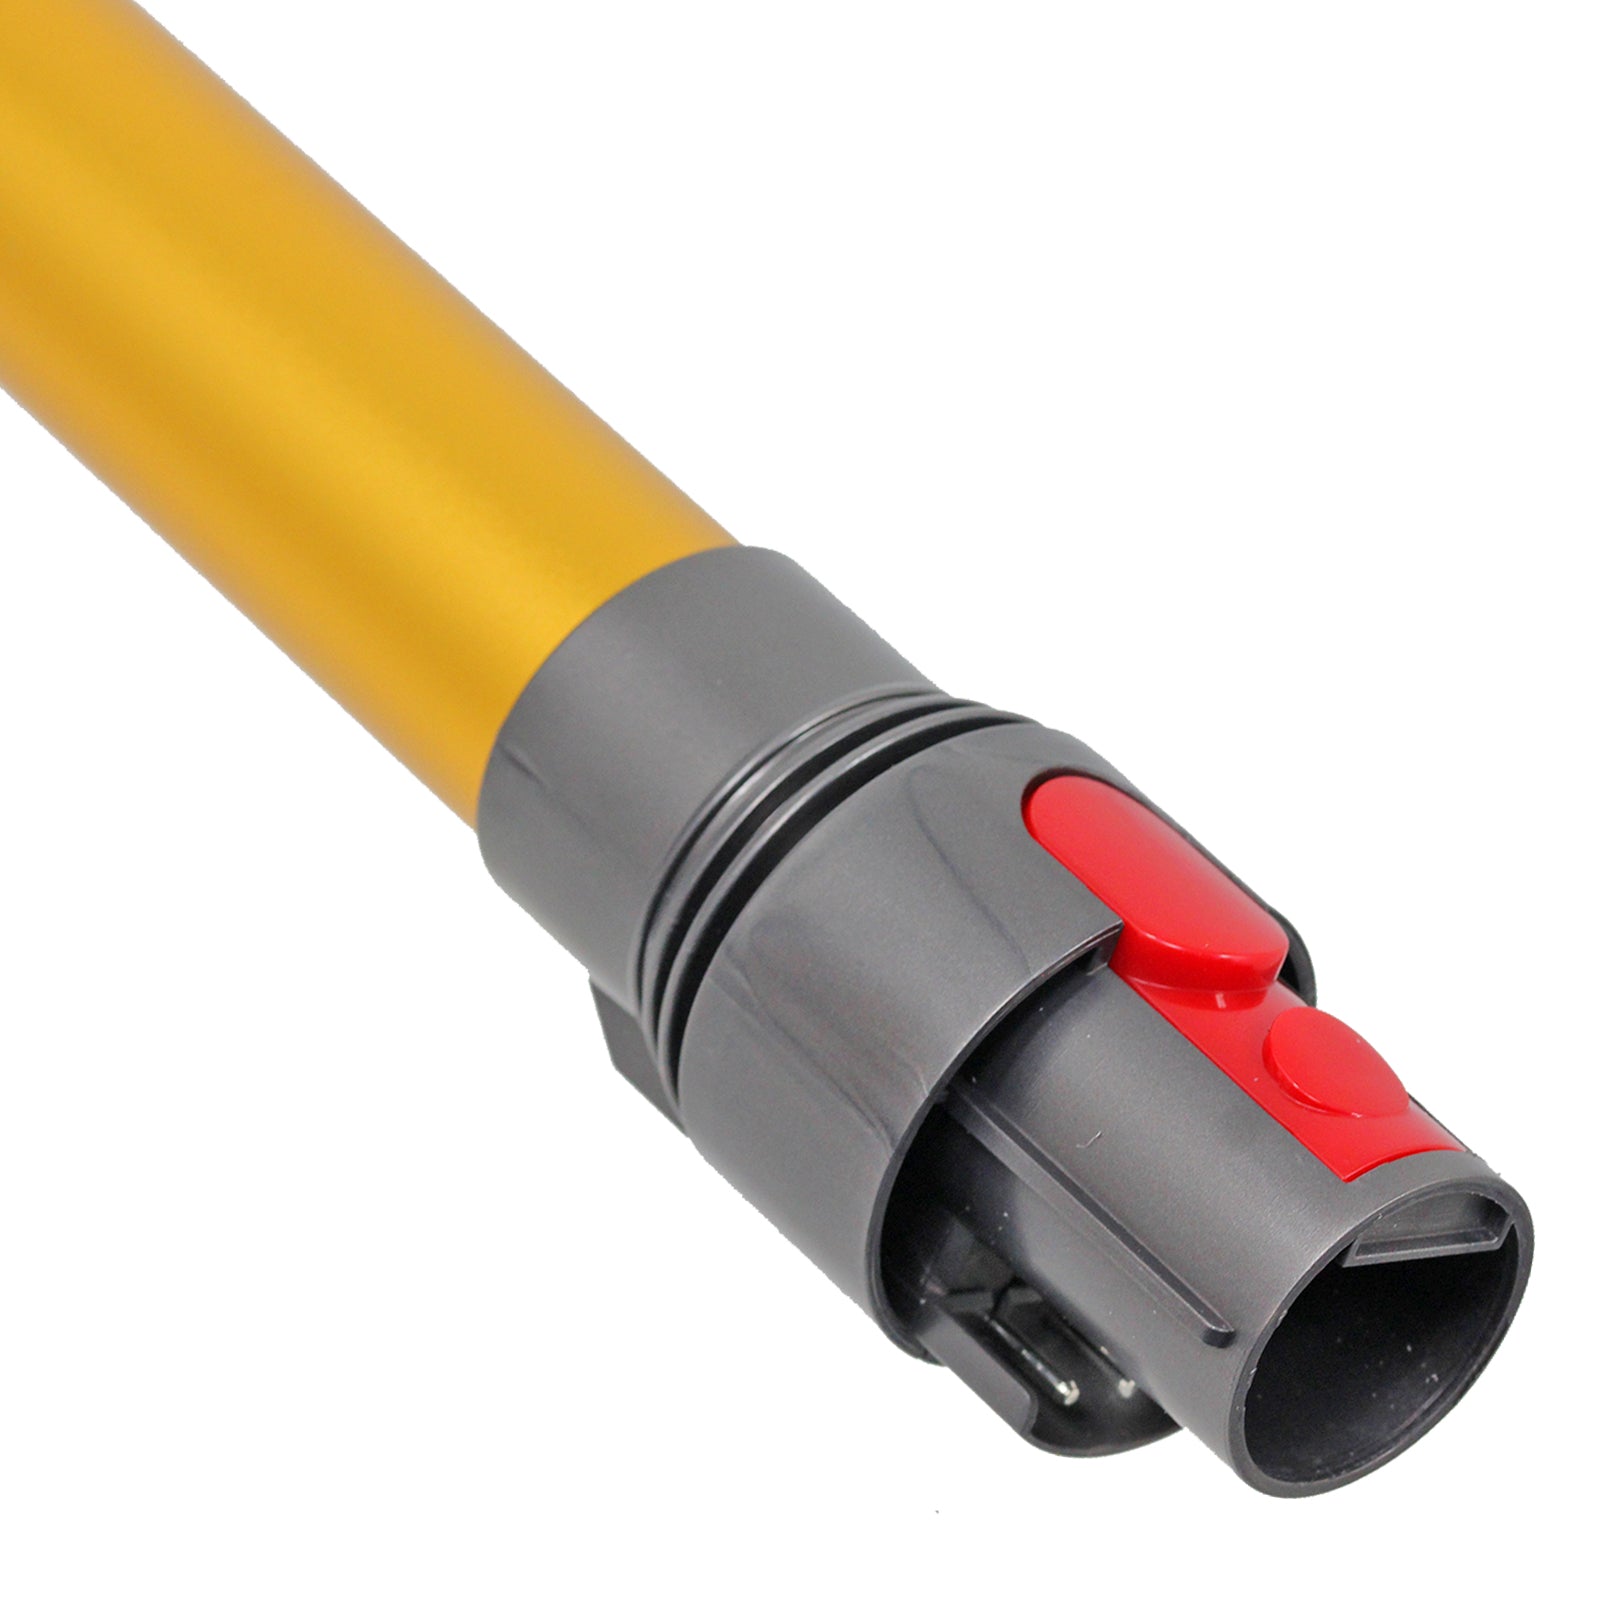 Orange / Yellow / Gold Rod Wand Tube Pipe for Dyson V8 SV10 Cordless Vacuum Cleaner